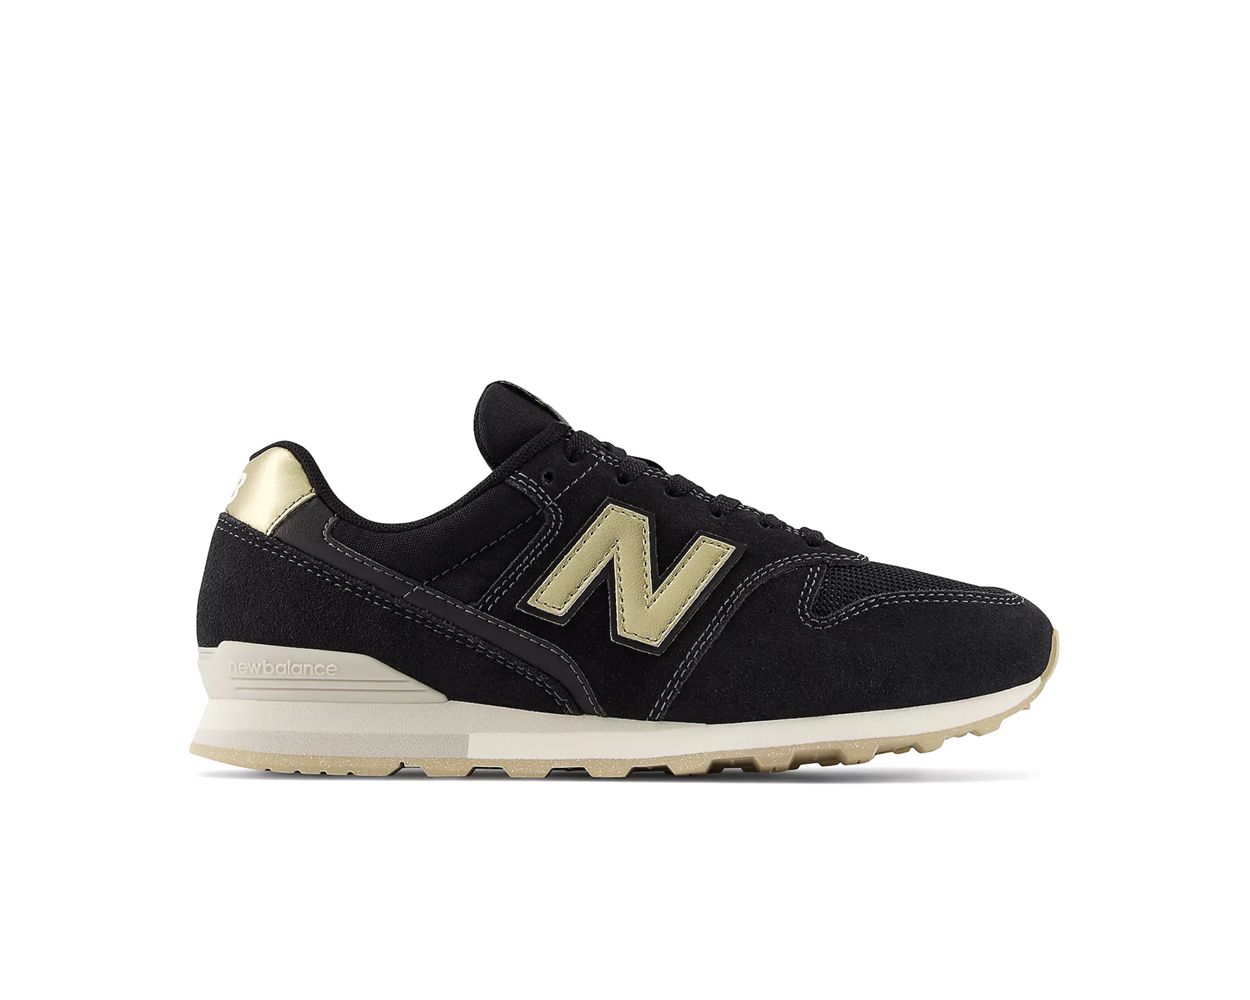 New Balance Women's WL996v2 Black with Magnet NEON Canada